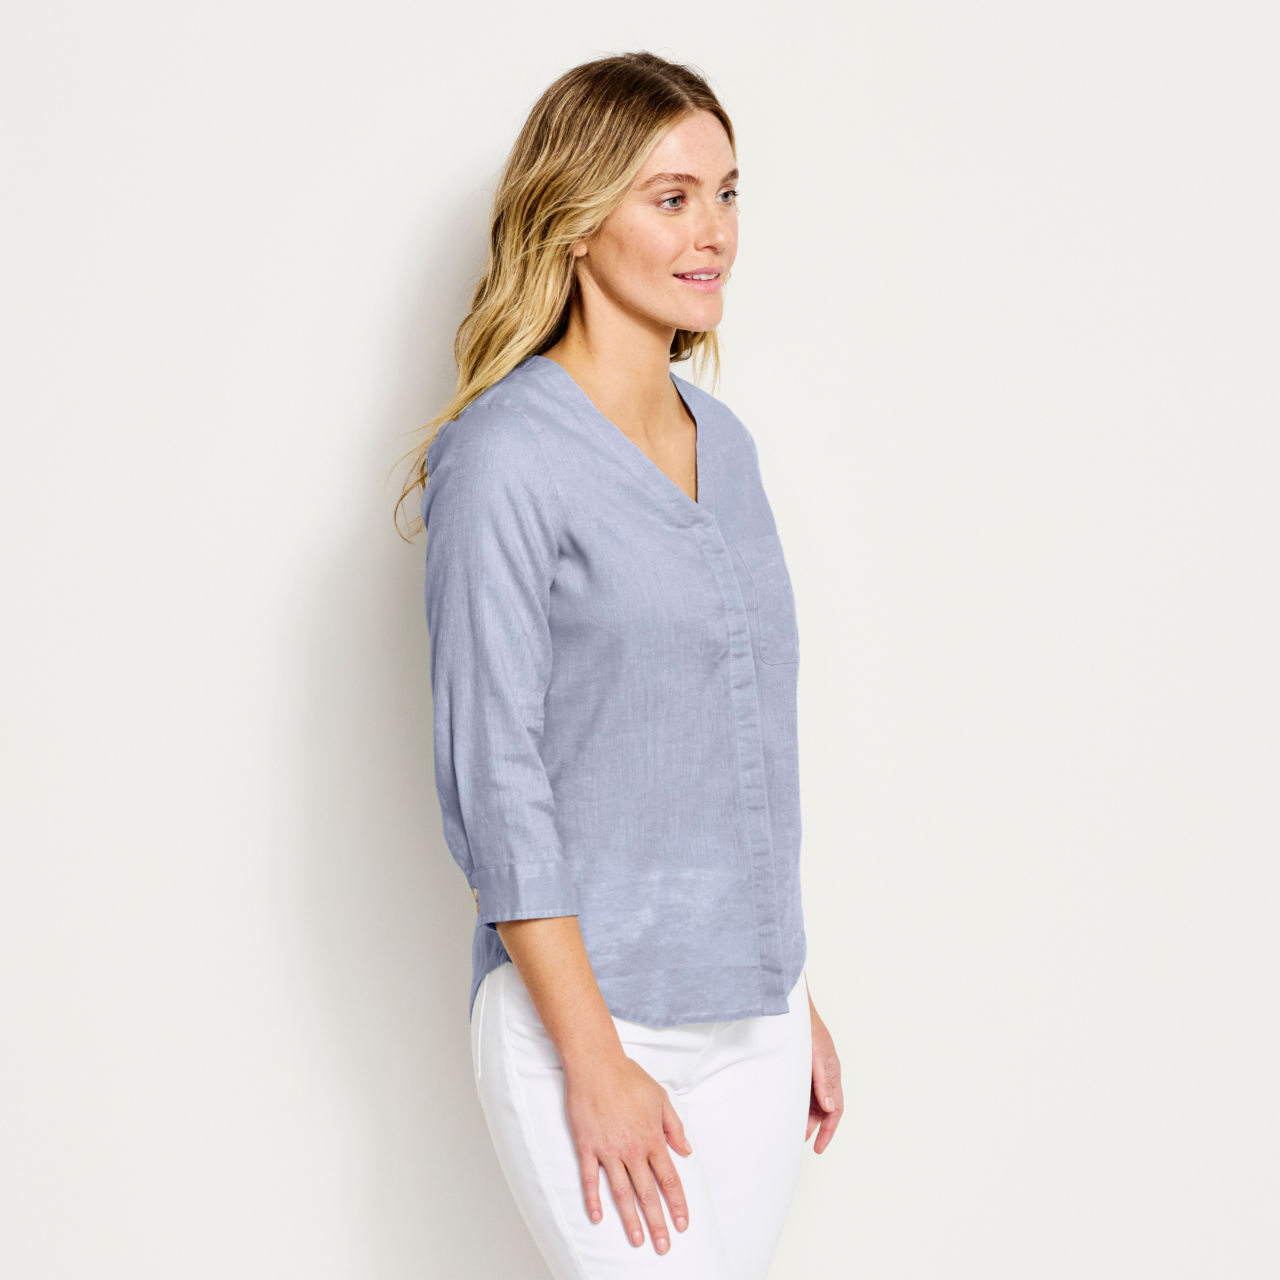 Women’s Performance Linen Three-Quarter-Sleeved Shirt - DUSTY BLUE CHAMBRAY image number 2